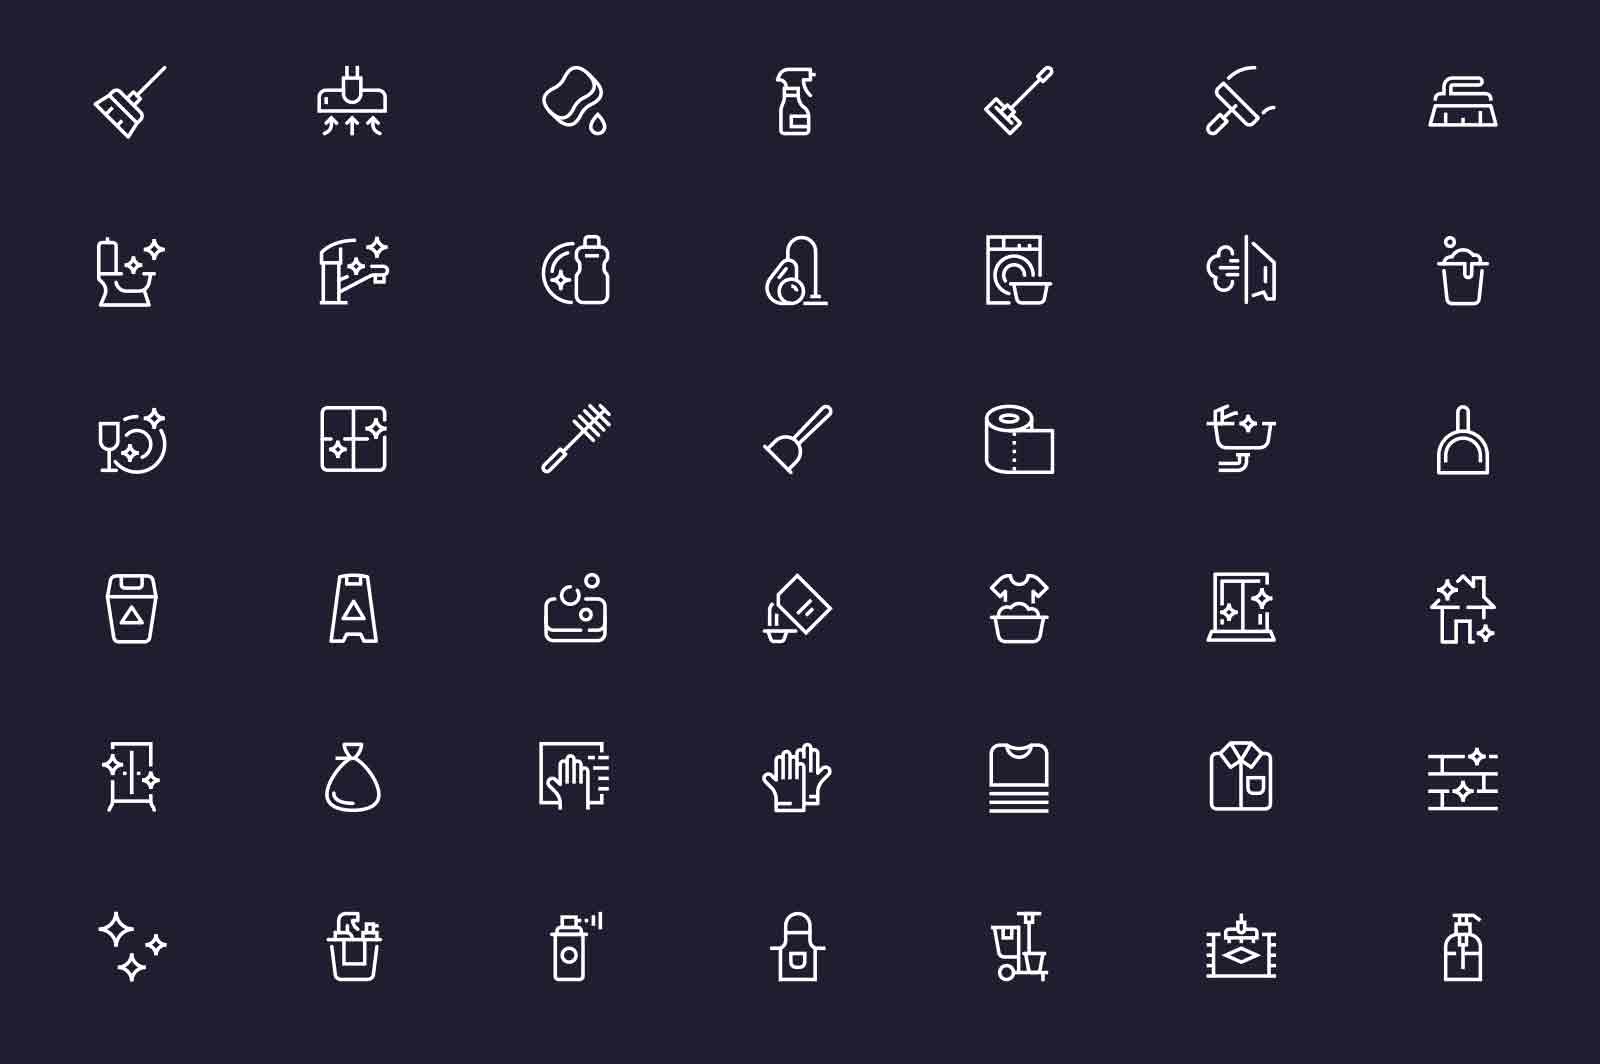 Equipment for cleaning home space icons set vector illustration. Shiny house, clean floor, smelly cloth, no dust line icon. Dark background